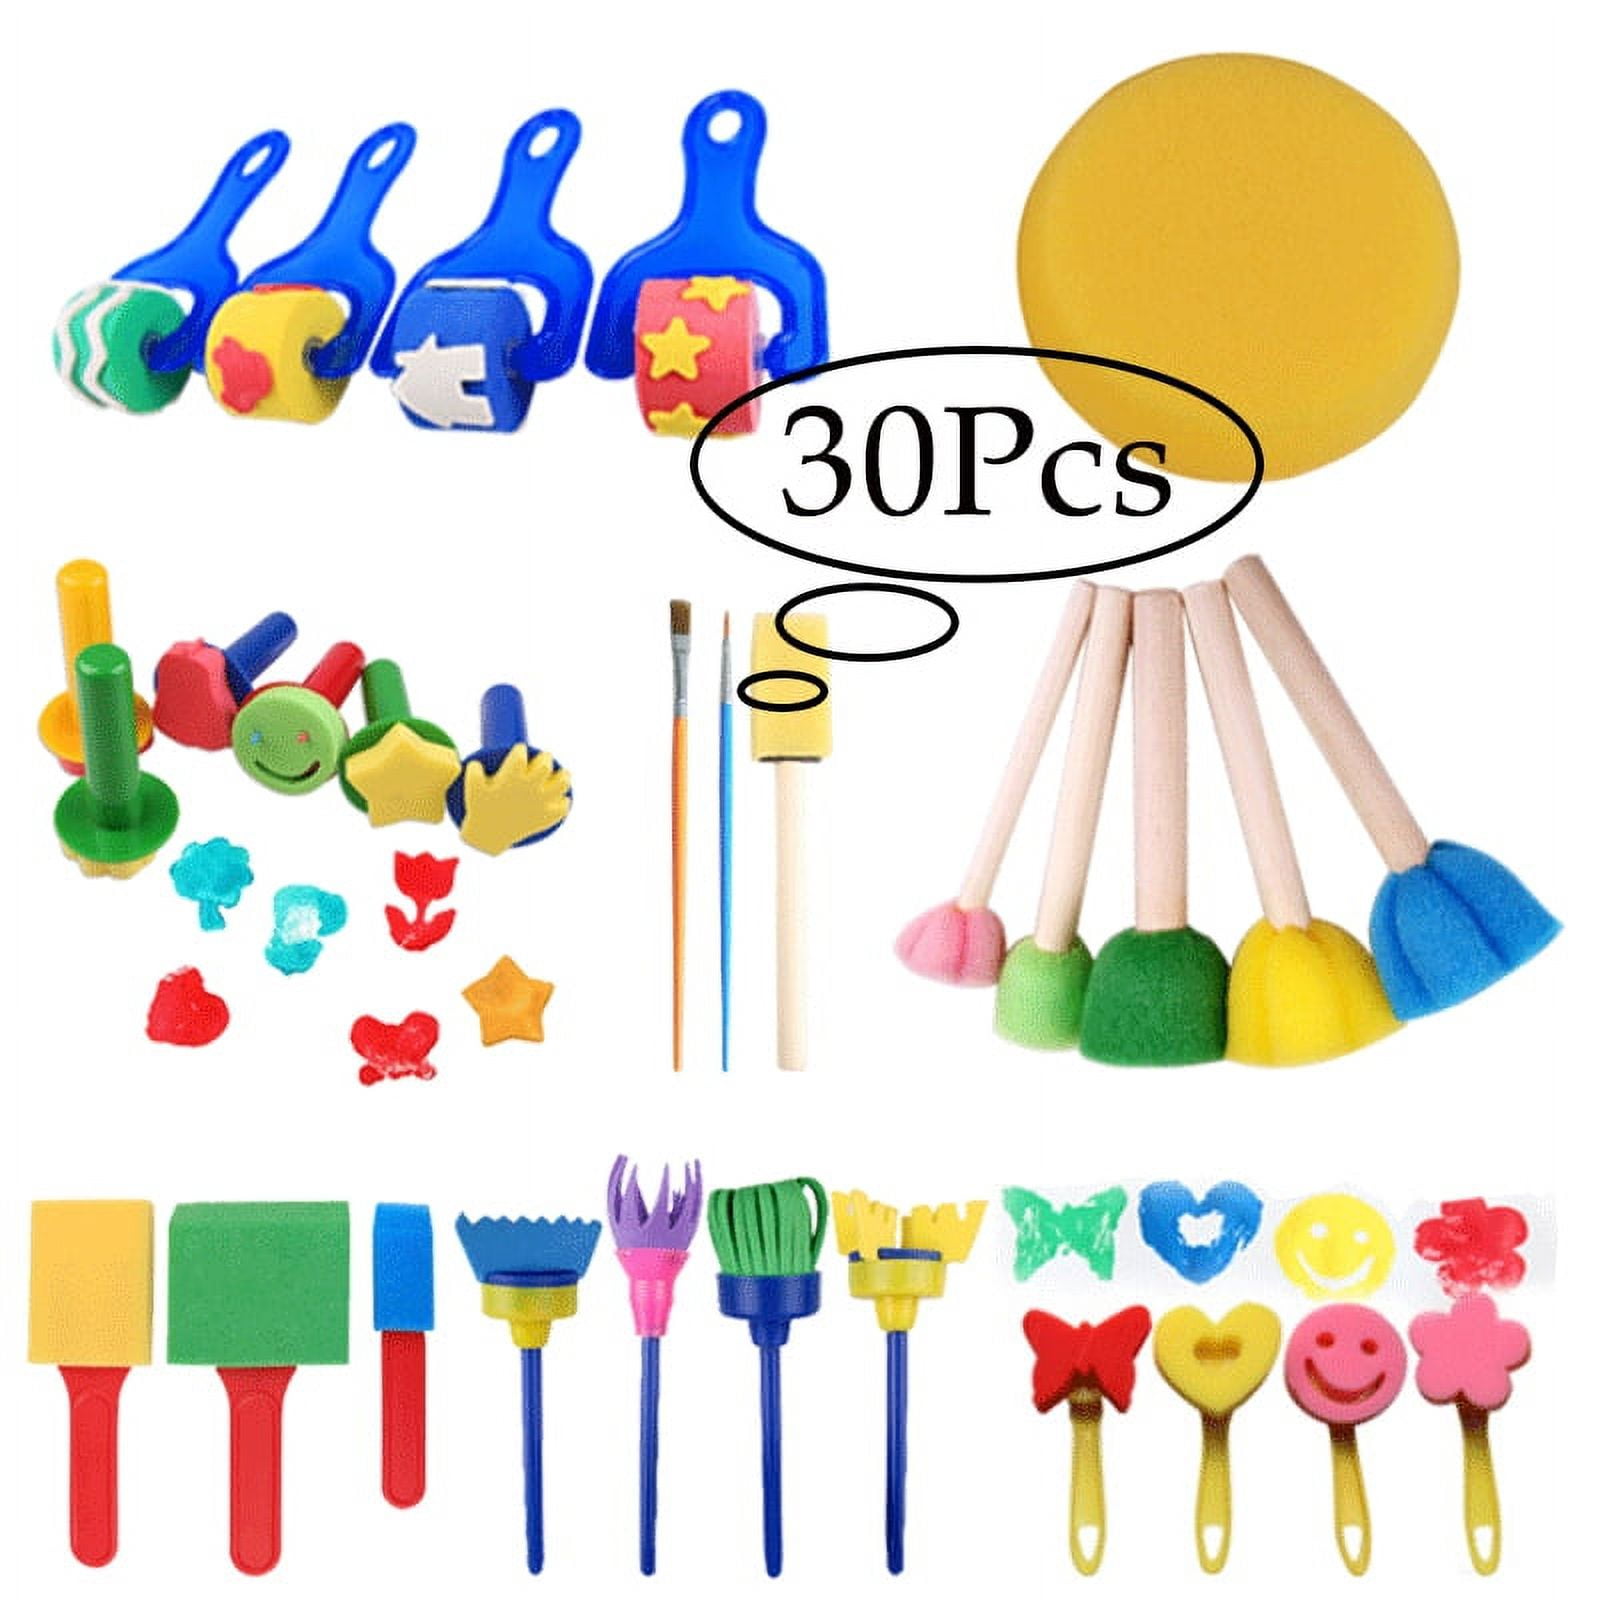 3 otters Toddler Paint Set, 21pcs Paint Tools for Kids Washable Paint Set  Painting Apron Brushes Kids Early Learning Finger Painting